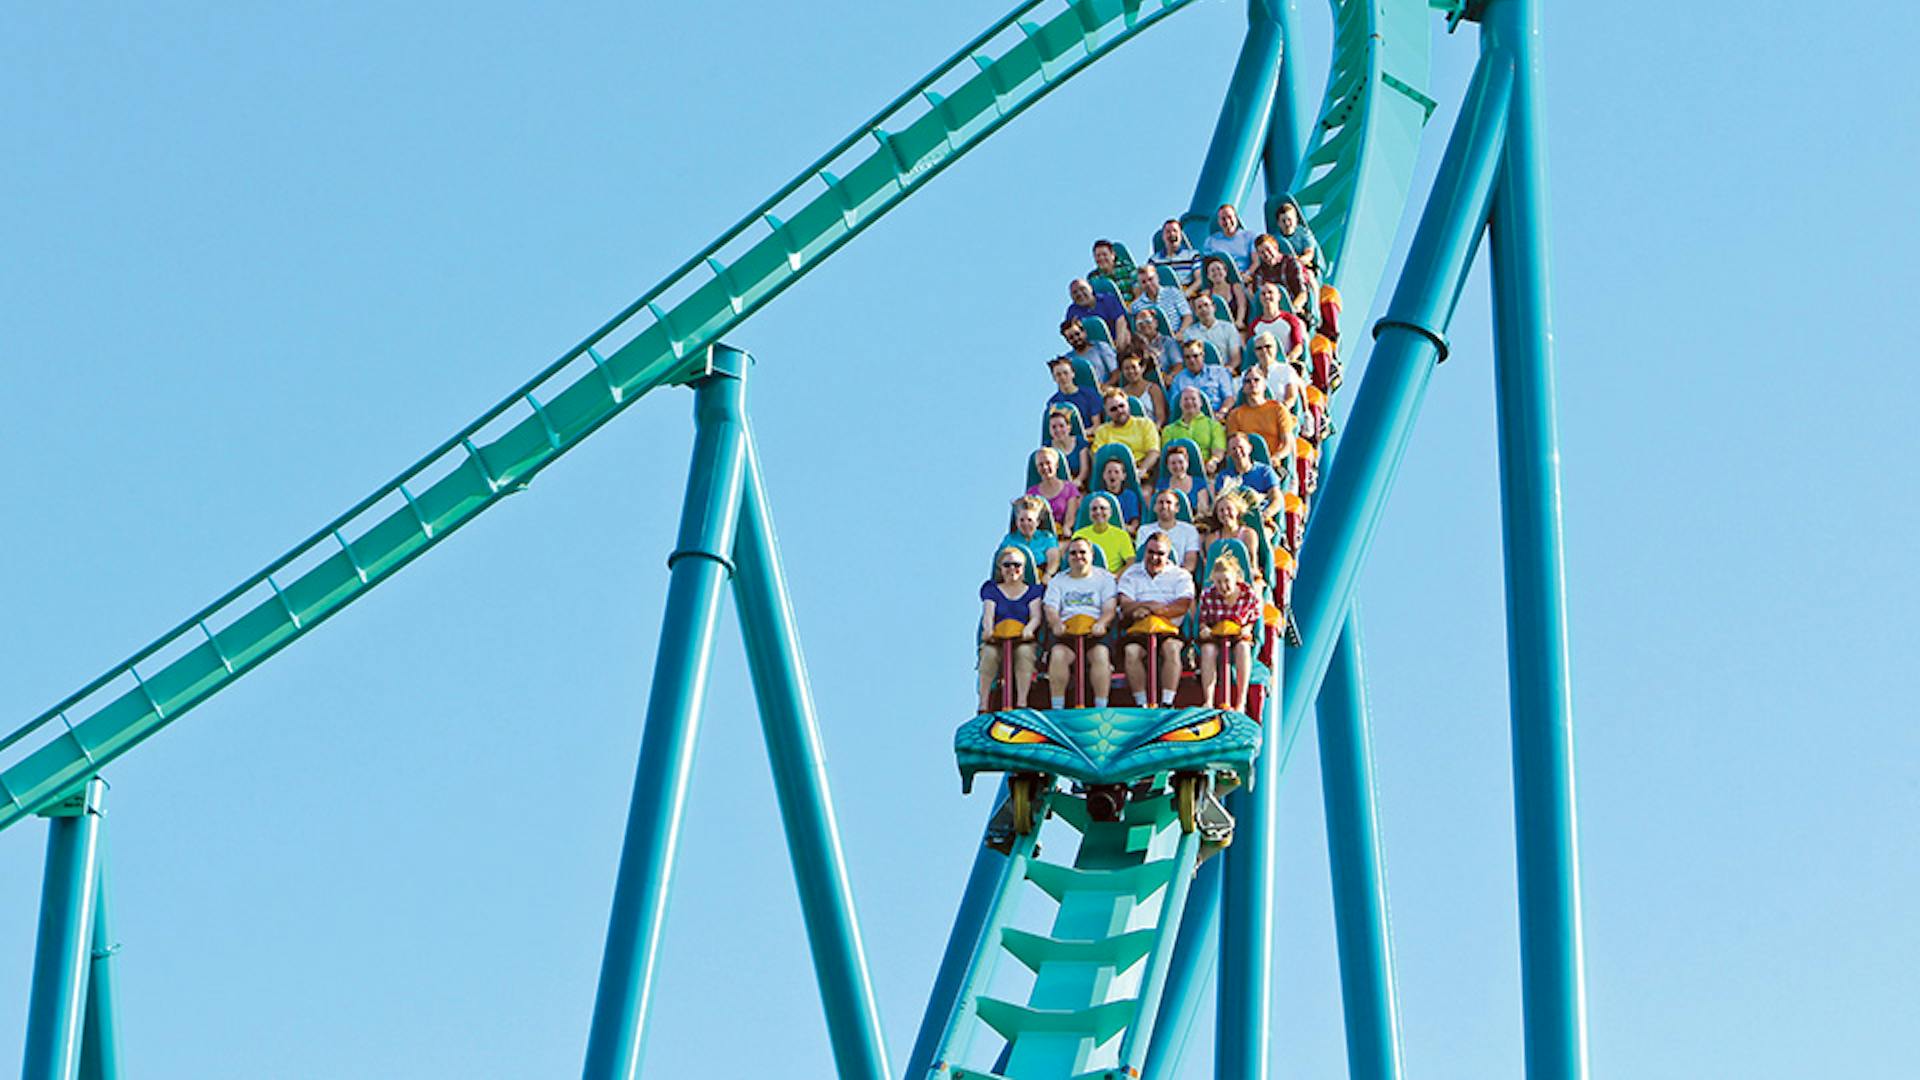 Riders on Leviathan at Canada's Wonderland in Vaughn, Ontario (photo by Dave Abel)